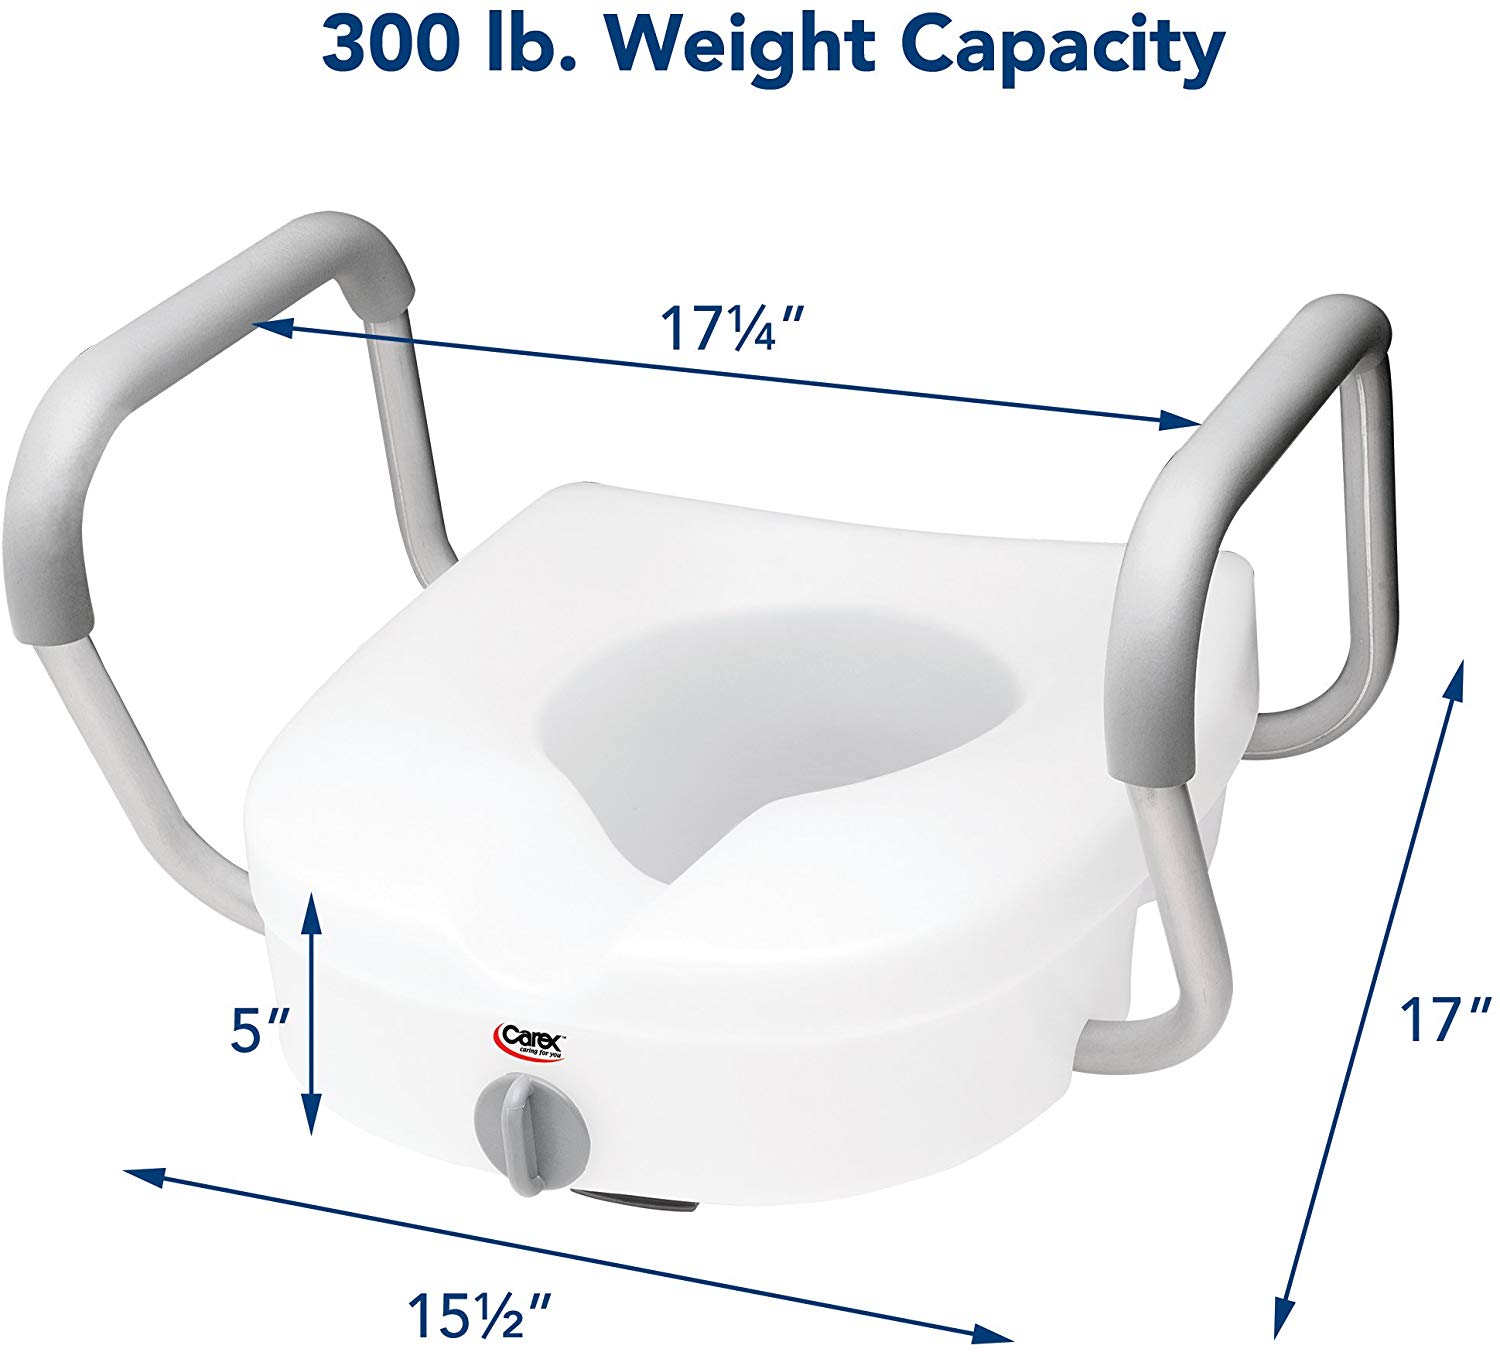 Carex EZ Lock Raised Toilet Seat with Handles, Adjustable Removable Arms, Adds 5", 300 lb Capacity - image 4 of 5